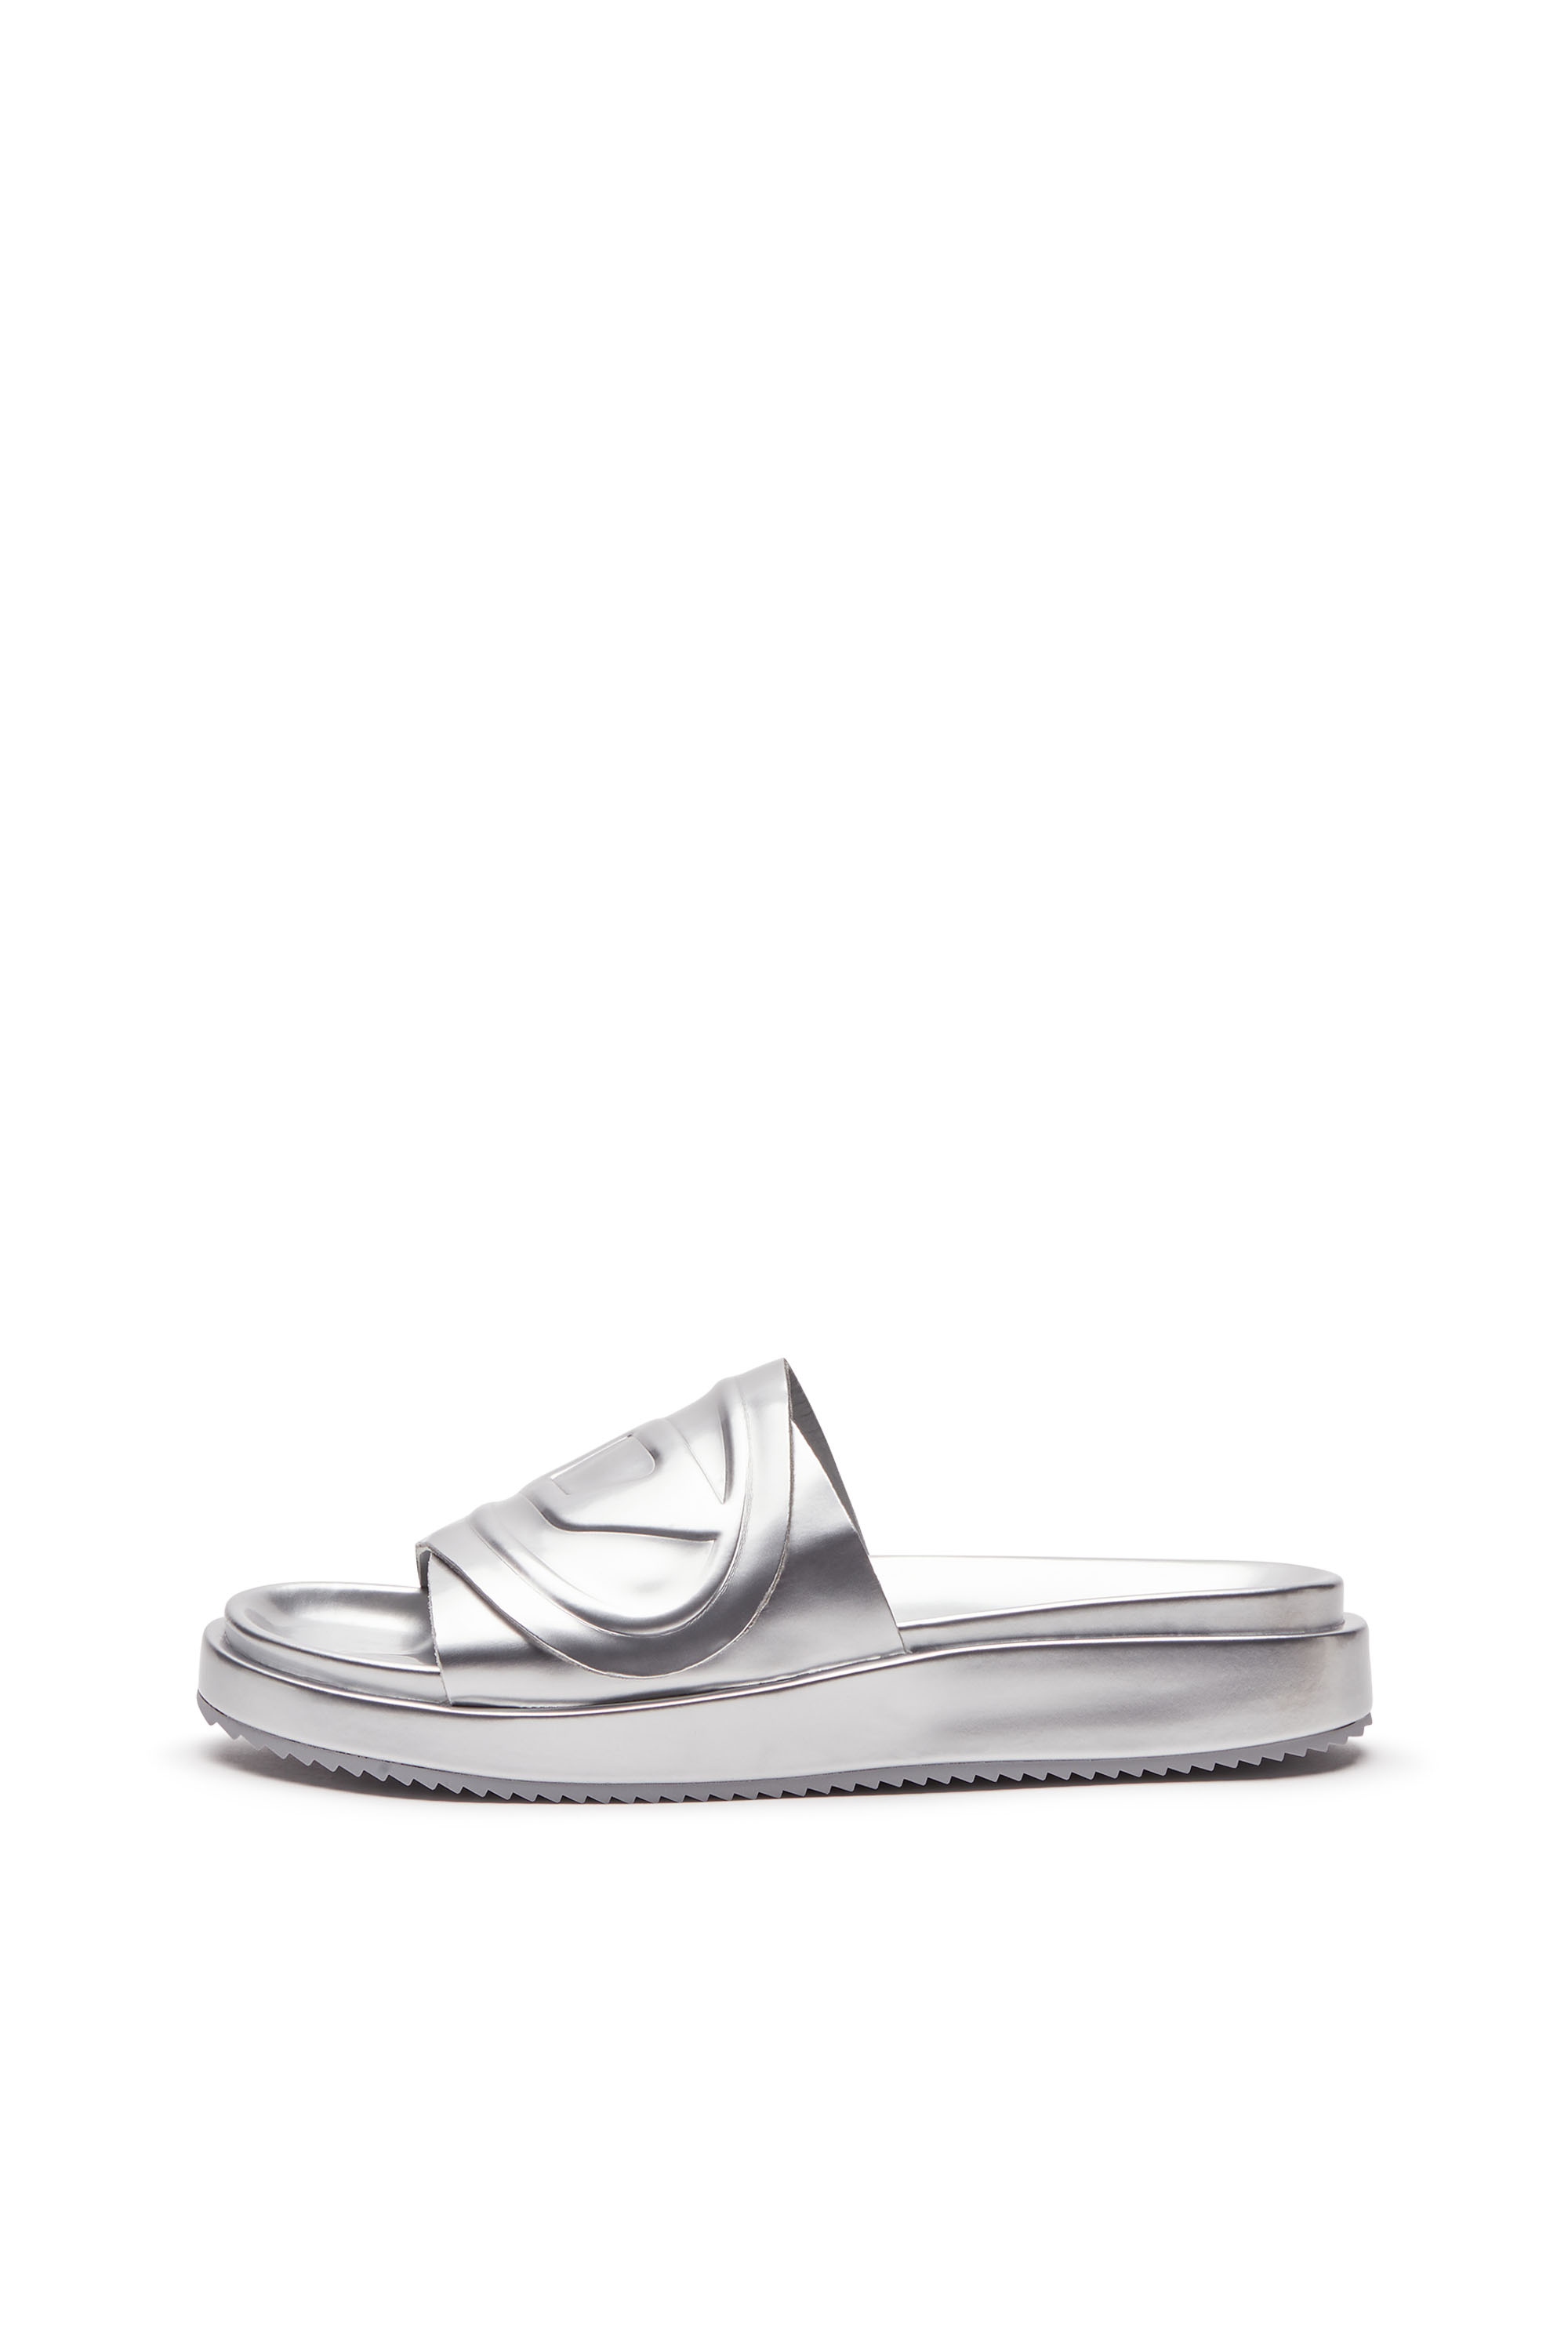 Diesel - SA-SLIDE D OVAL W, Woman Sa-Slide D-Metallic slide sandals with Oval D strap in Silver - Image 7